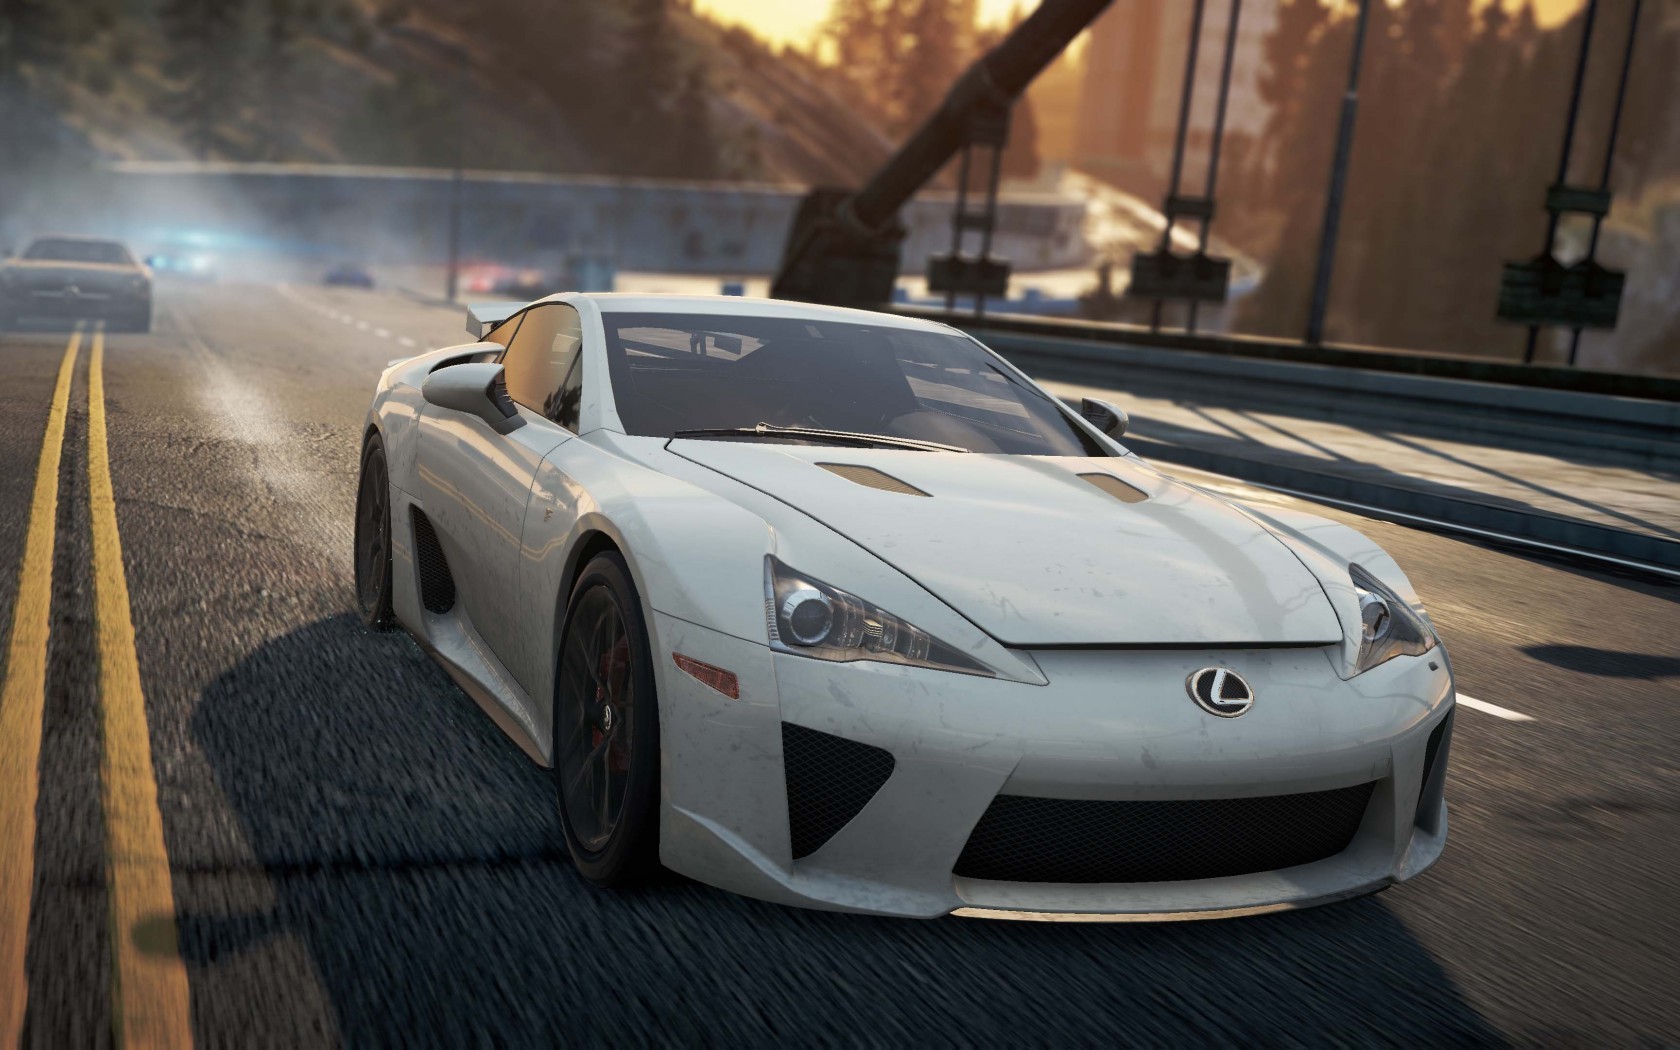 Nfs mw 2. Lexus LFA NFS most wanted. Need for Speed most wanted 2012. Нфс МВ 2012. Lexus NFS most wanted 2012.